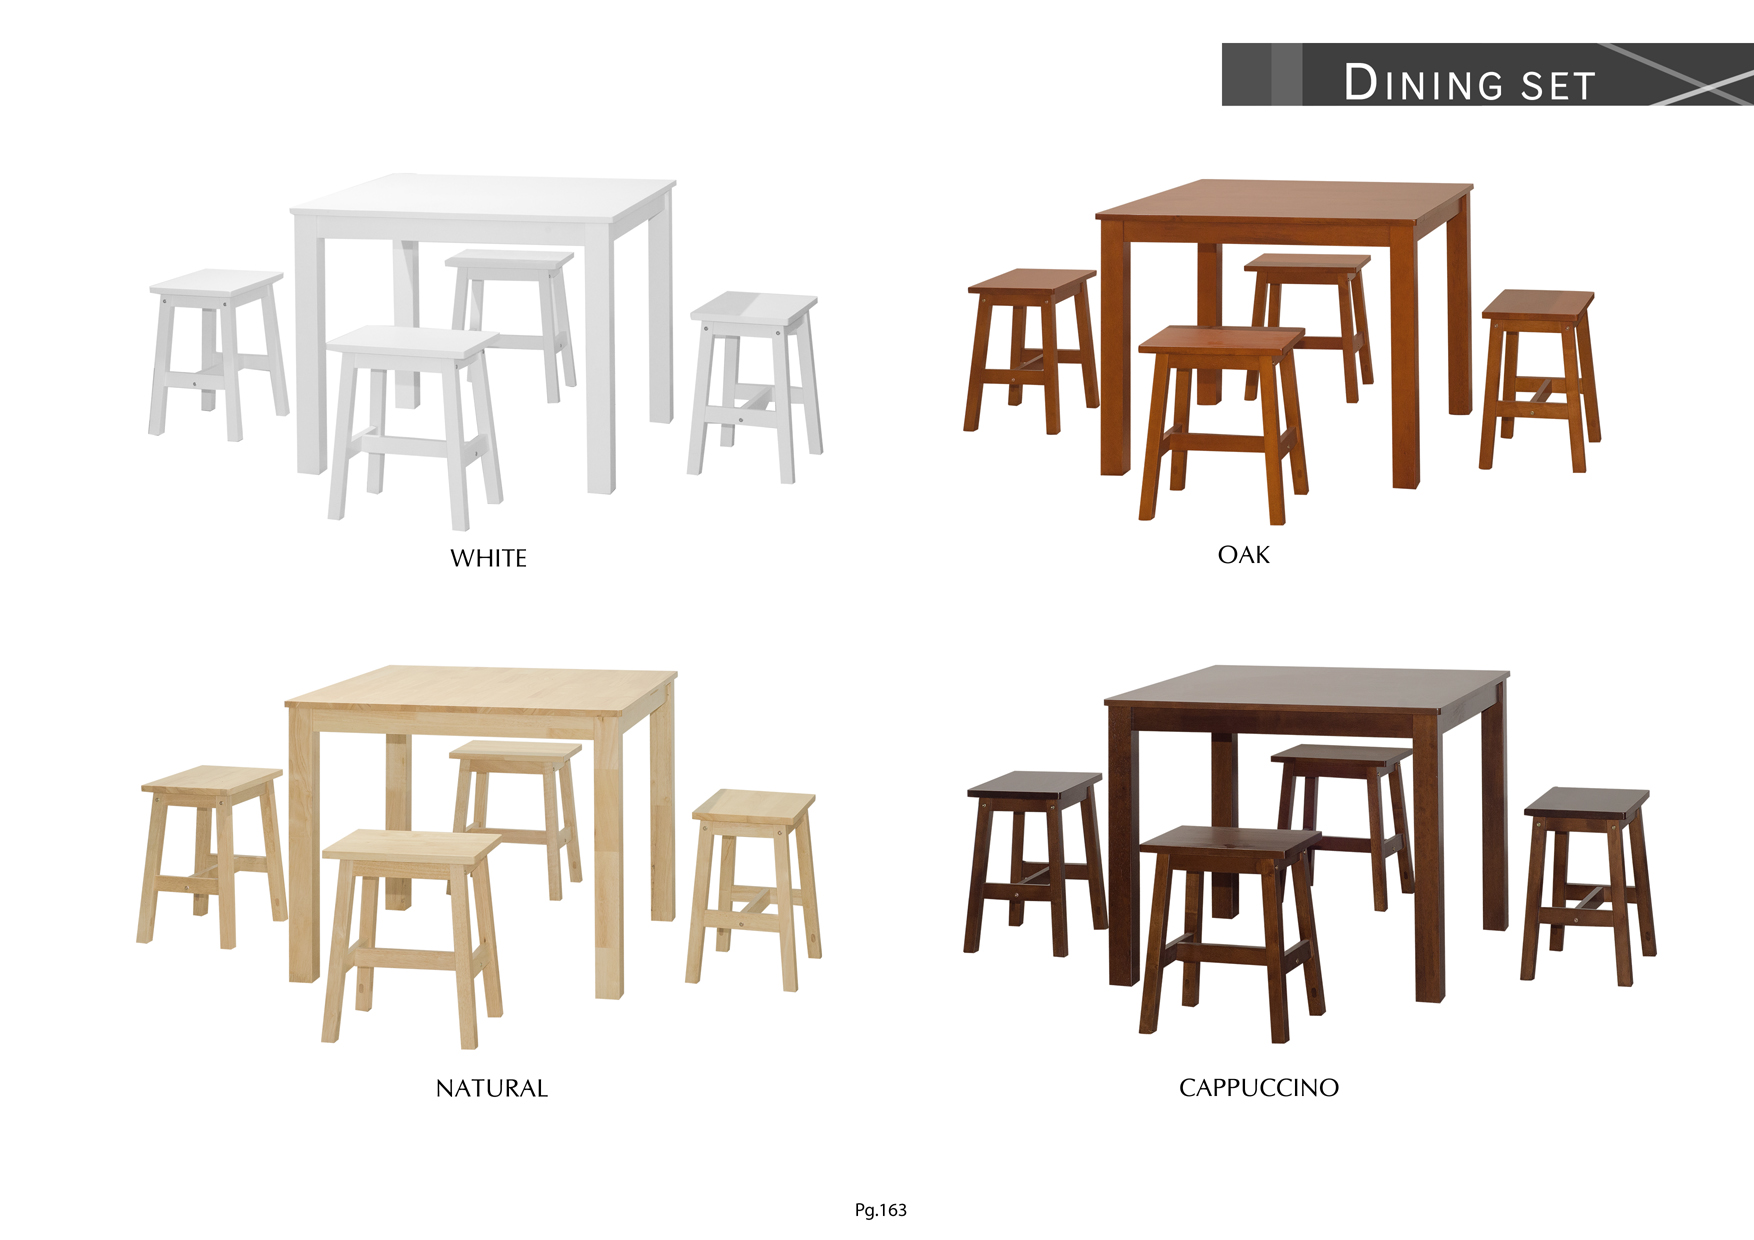 Product: PG163. TAIWAN DINING SET